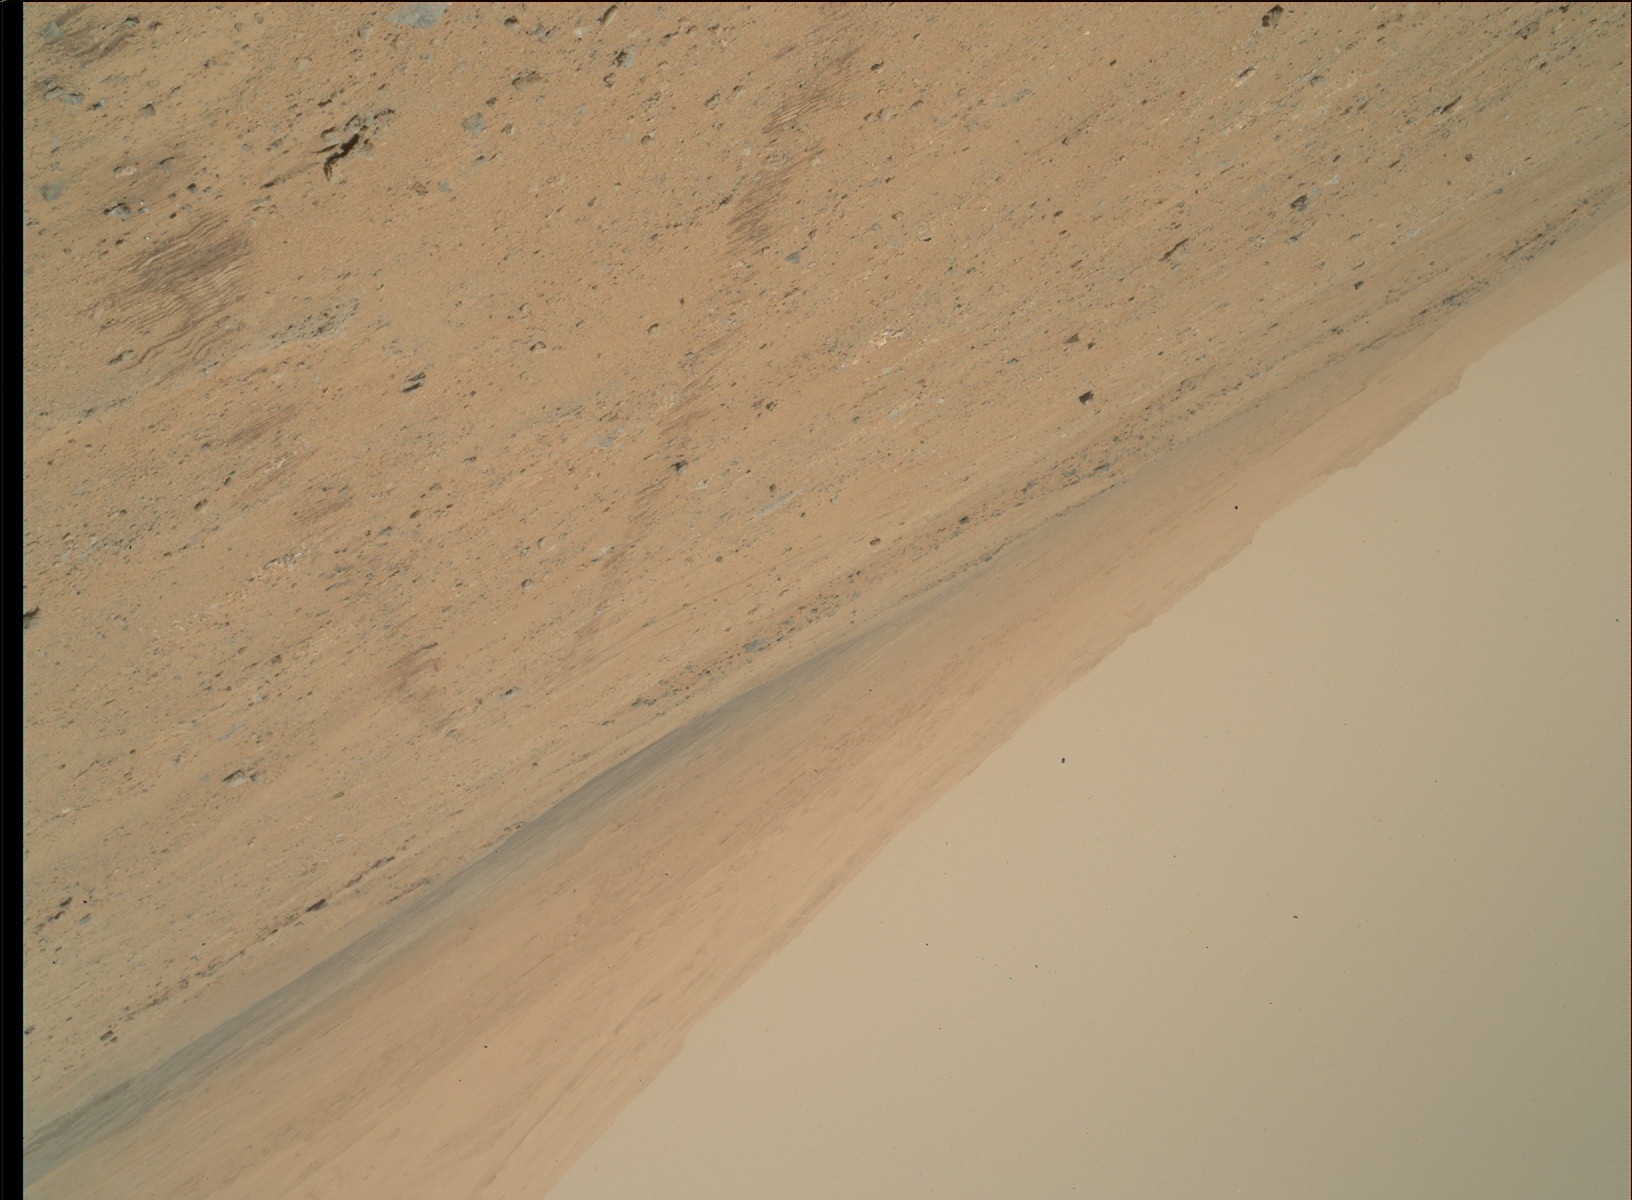 Nasa's Mars rover Curiosity acquired this image using its Mars Hand Lens Imager (MAHLI) on Sol 370